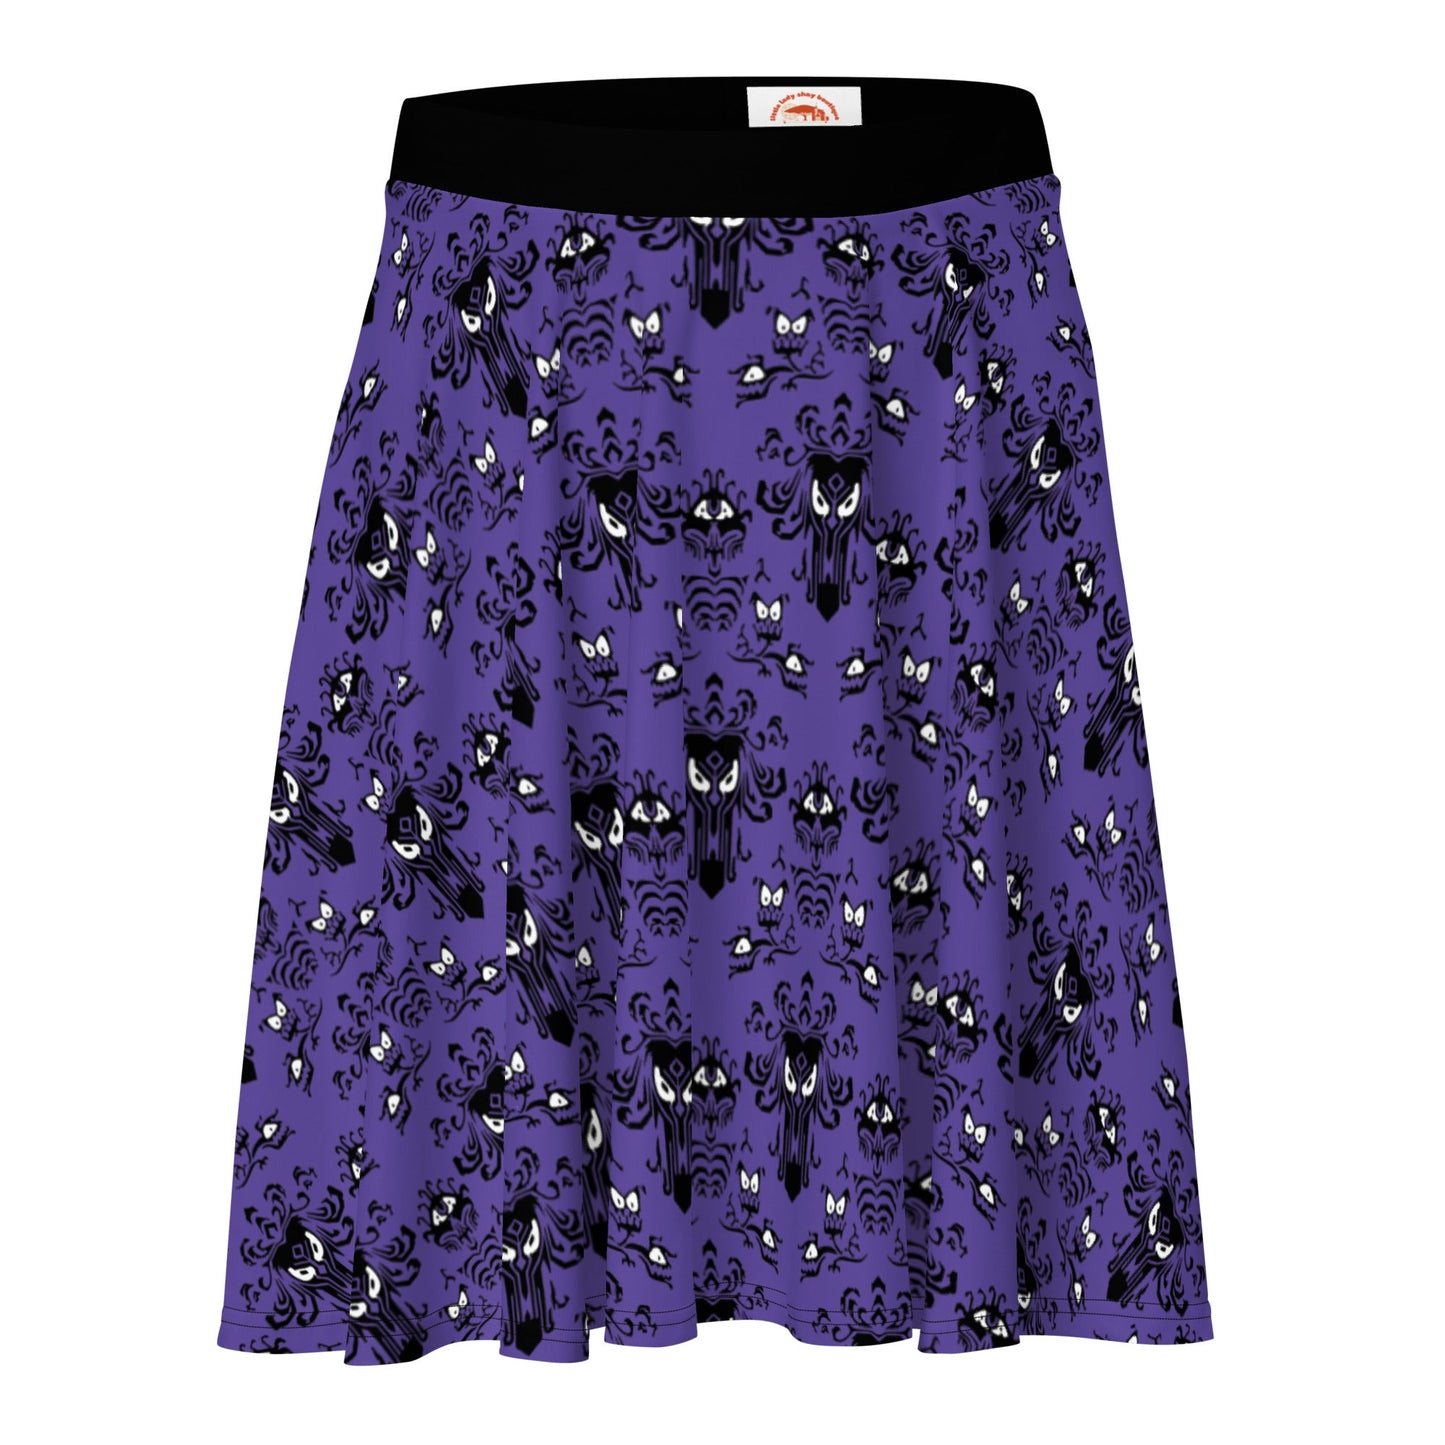 Haunted House Skater Skirt active wearboo to youcosplay#tag4##tag5##tag6#